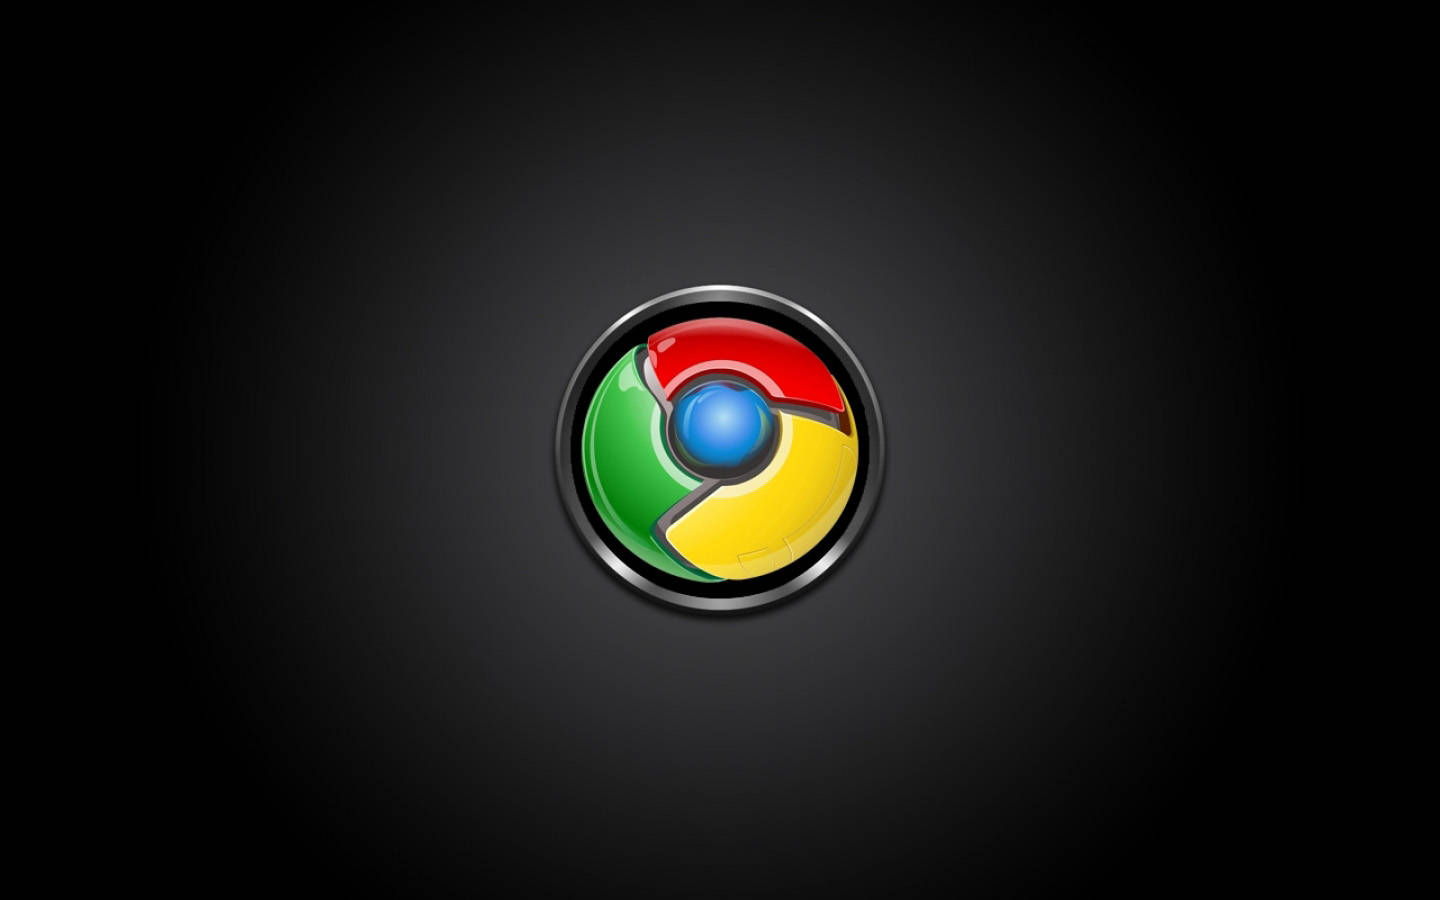 Chrome Logo In Black On A Glossy Background Wallpaper